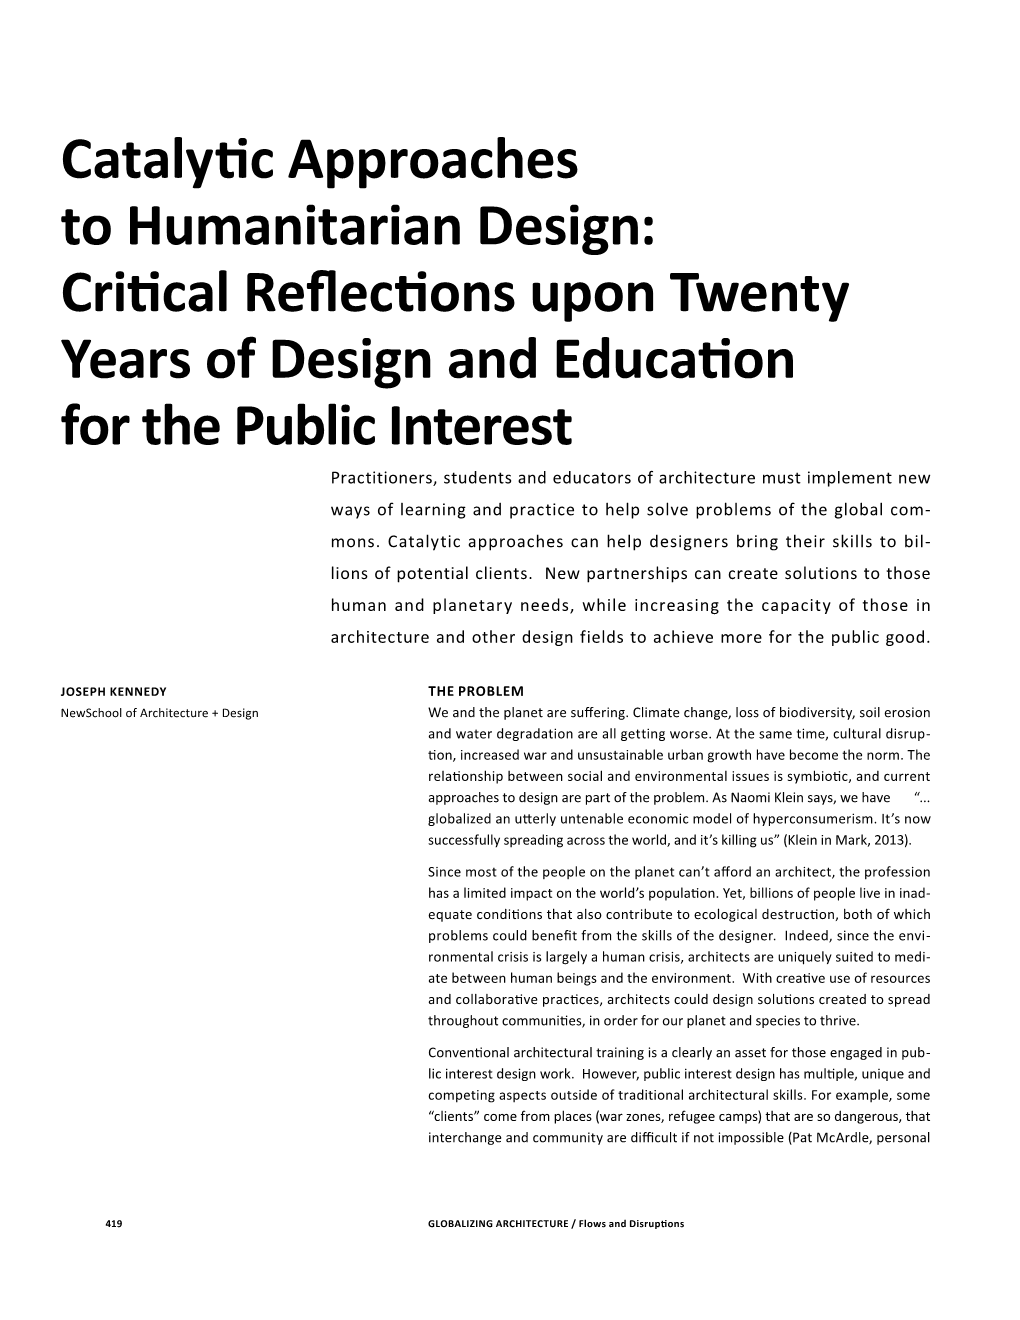 Catalytic Approaches to Humanitarian Design: Critical Reflections Upon Twenty Years of Design and Education for the Public In